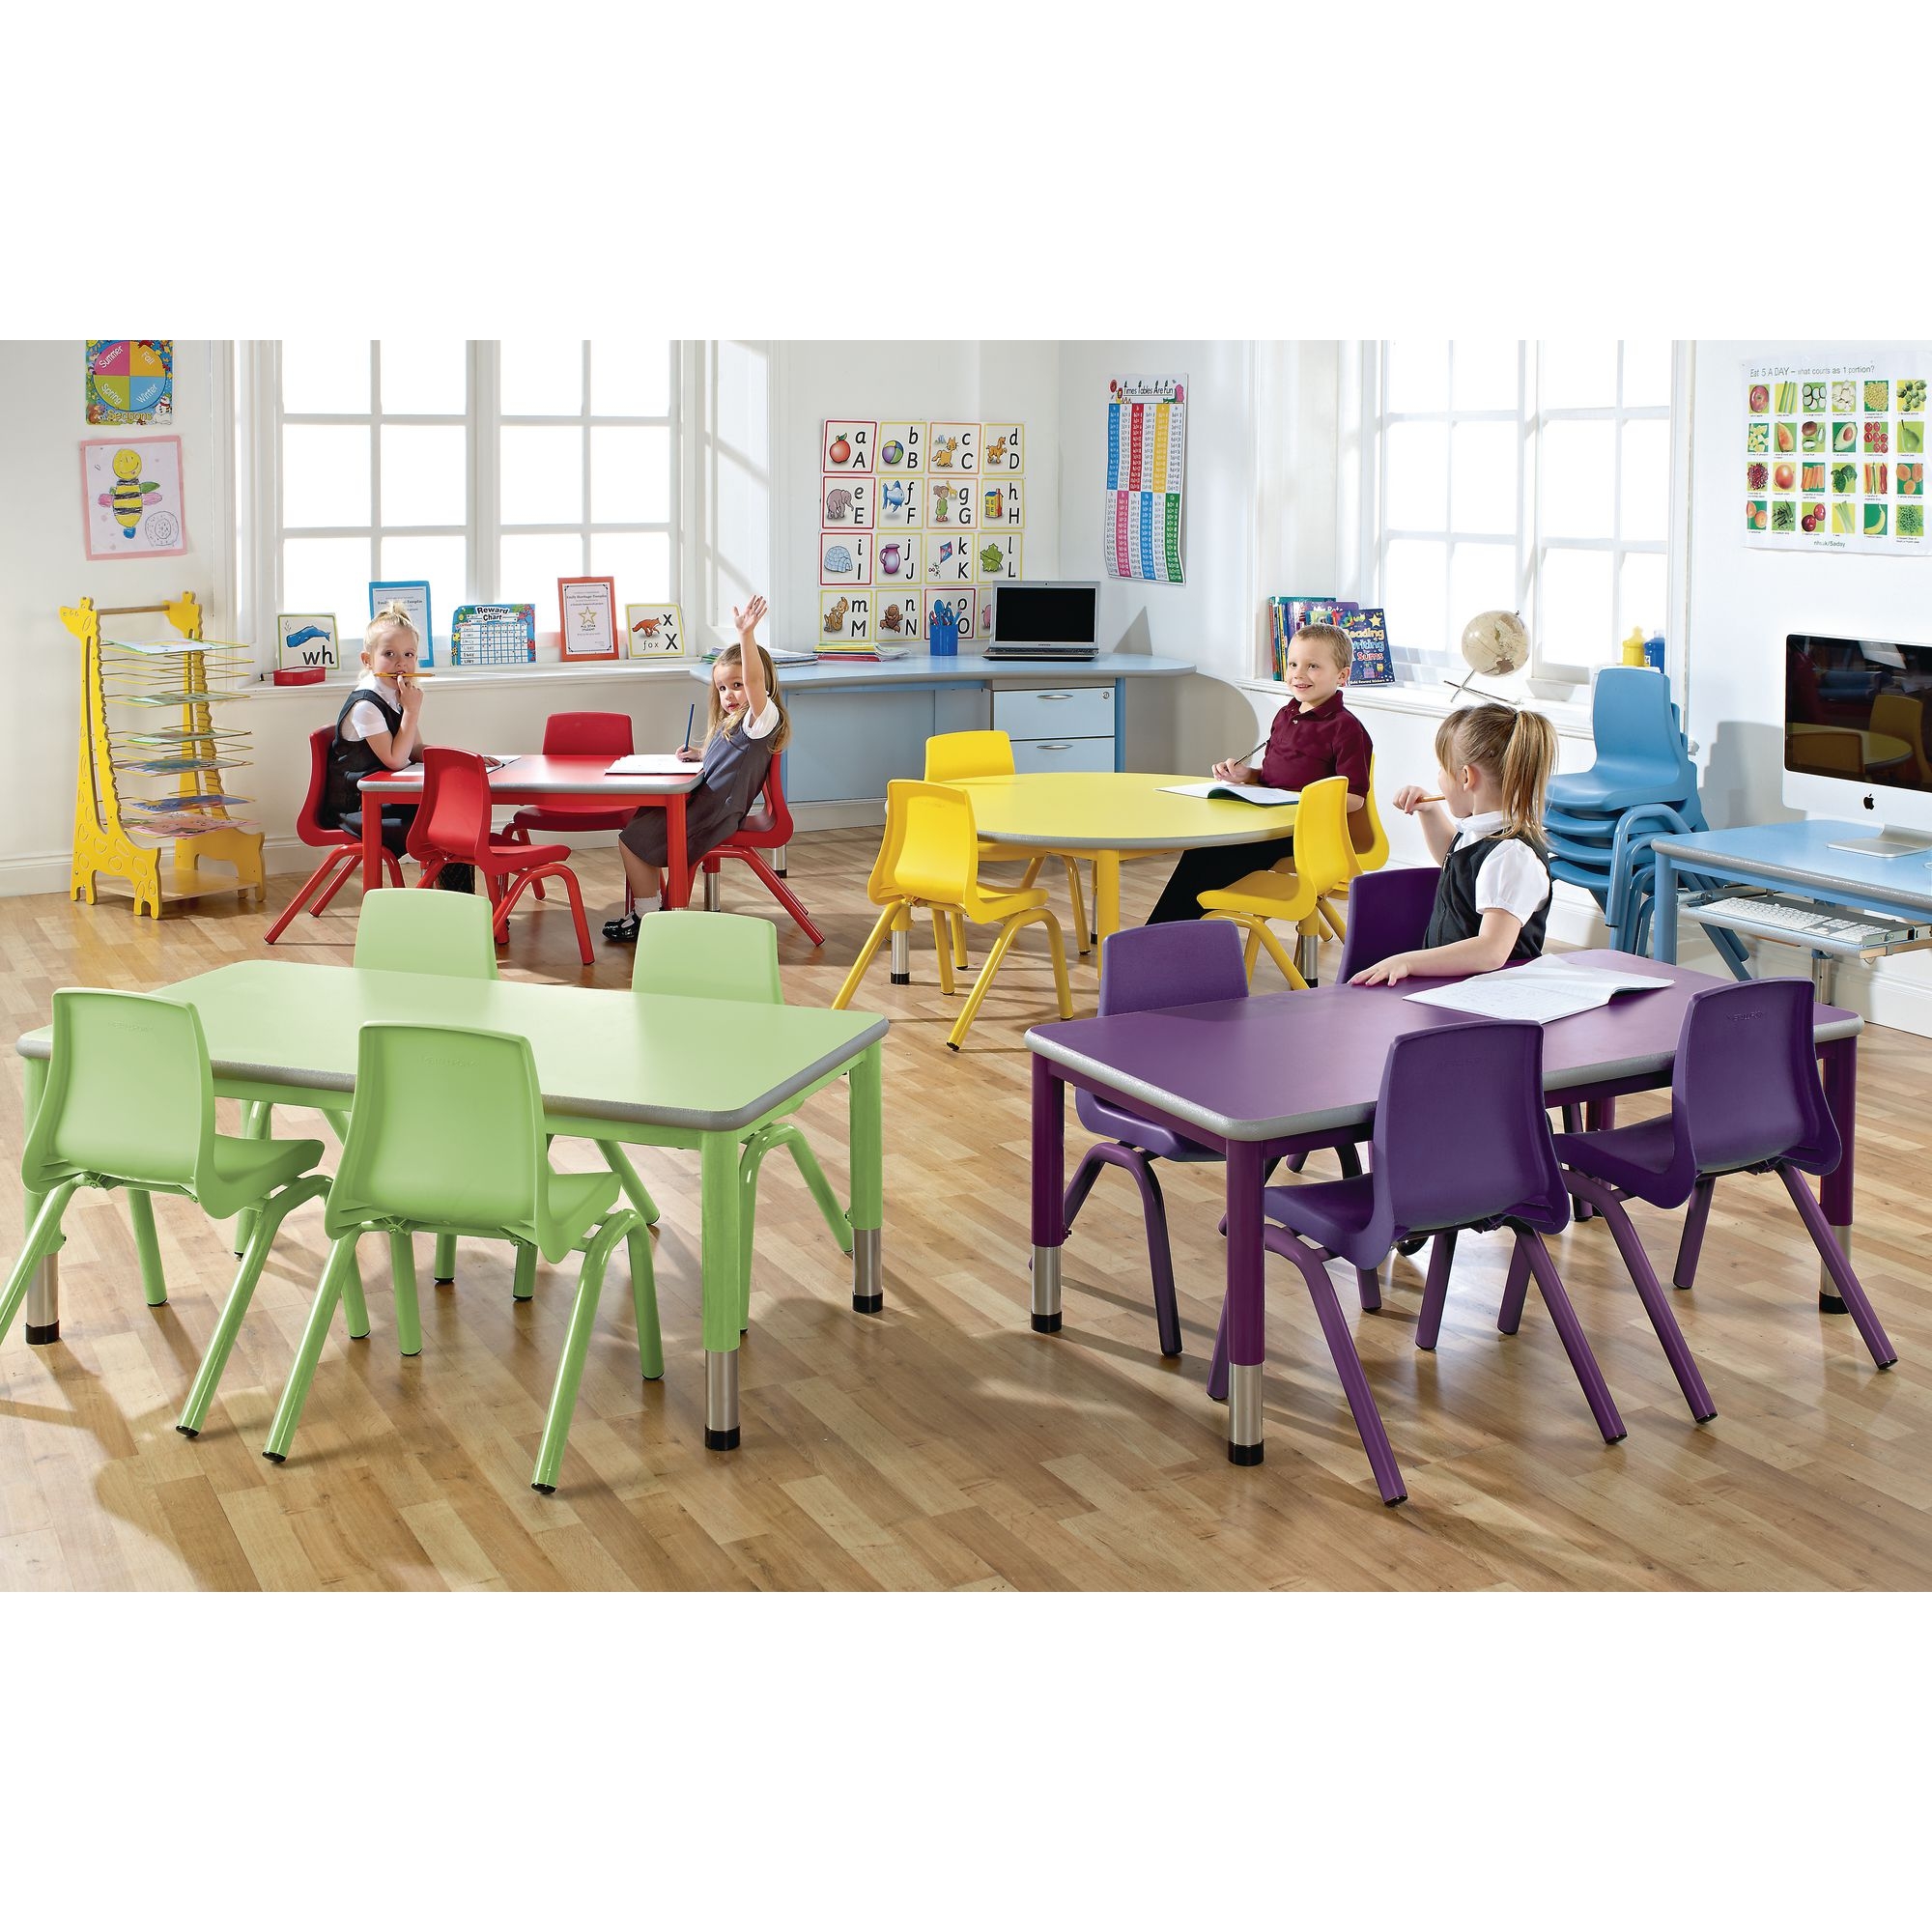 Harlequin Rectangular Height Adjustable Steel Classroom Pack: Table and 4 Chairs - 900 x 600 x 640mm - Purple